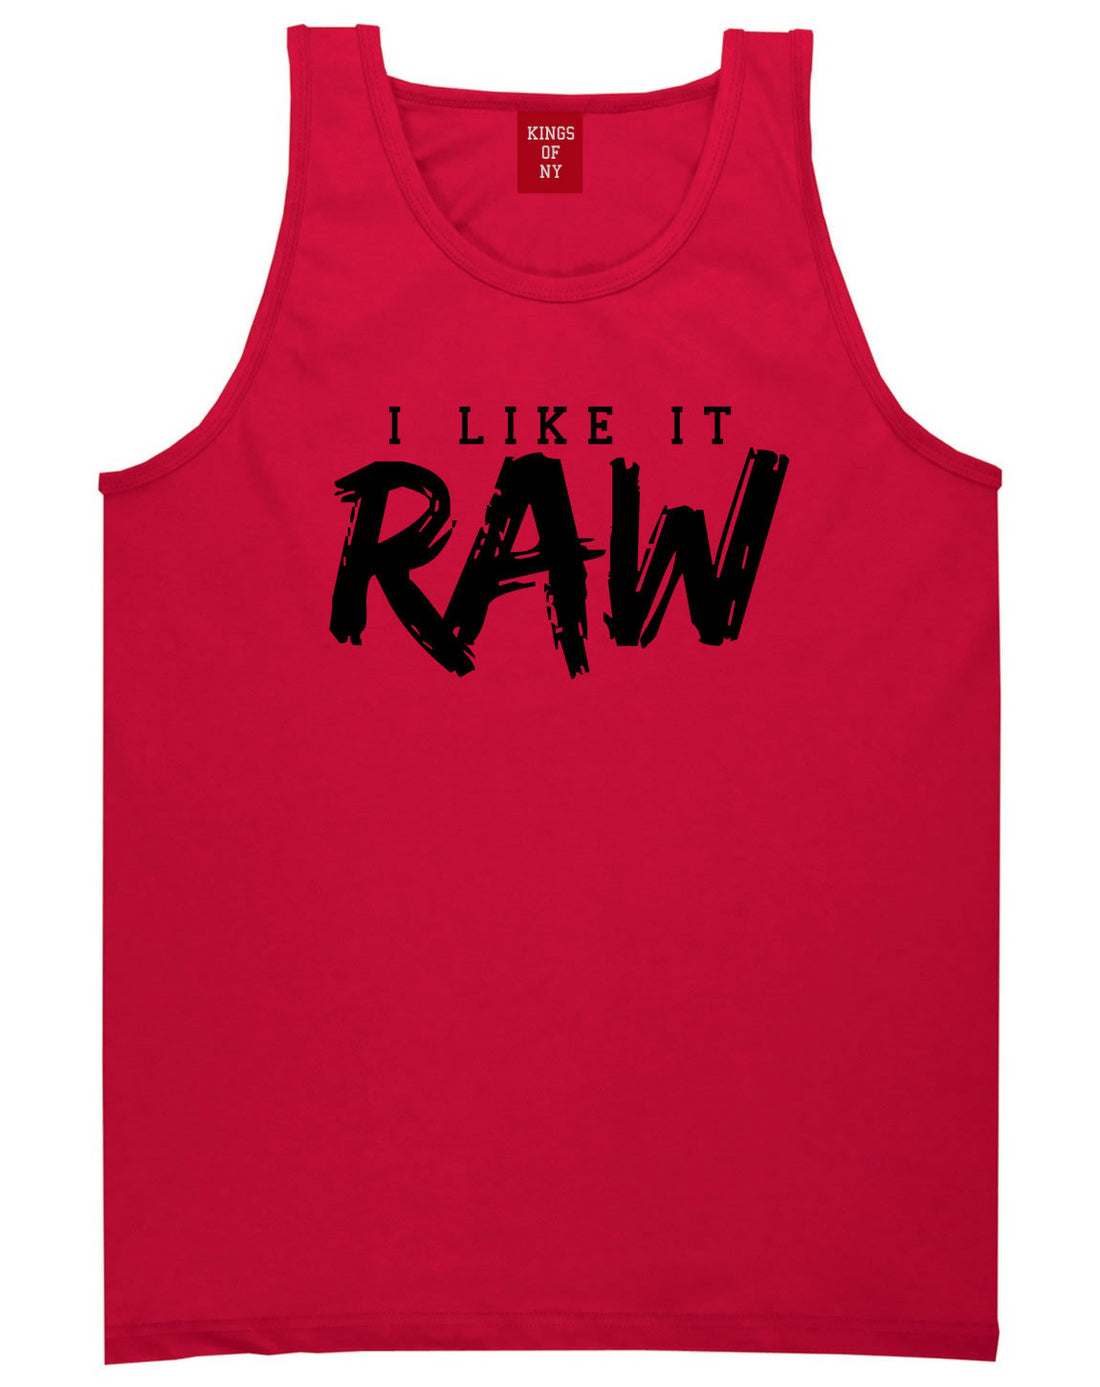 I Like It Raw Tank Top in Red By Kings Of NY